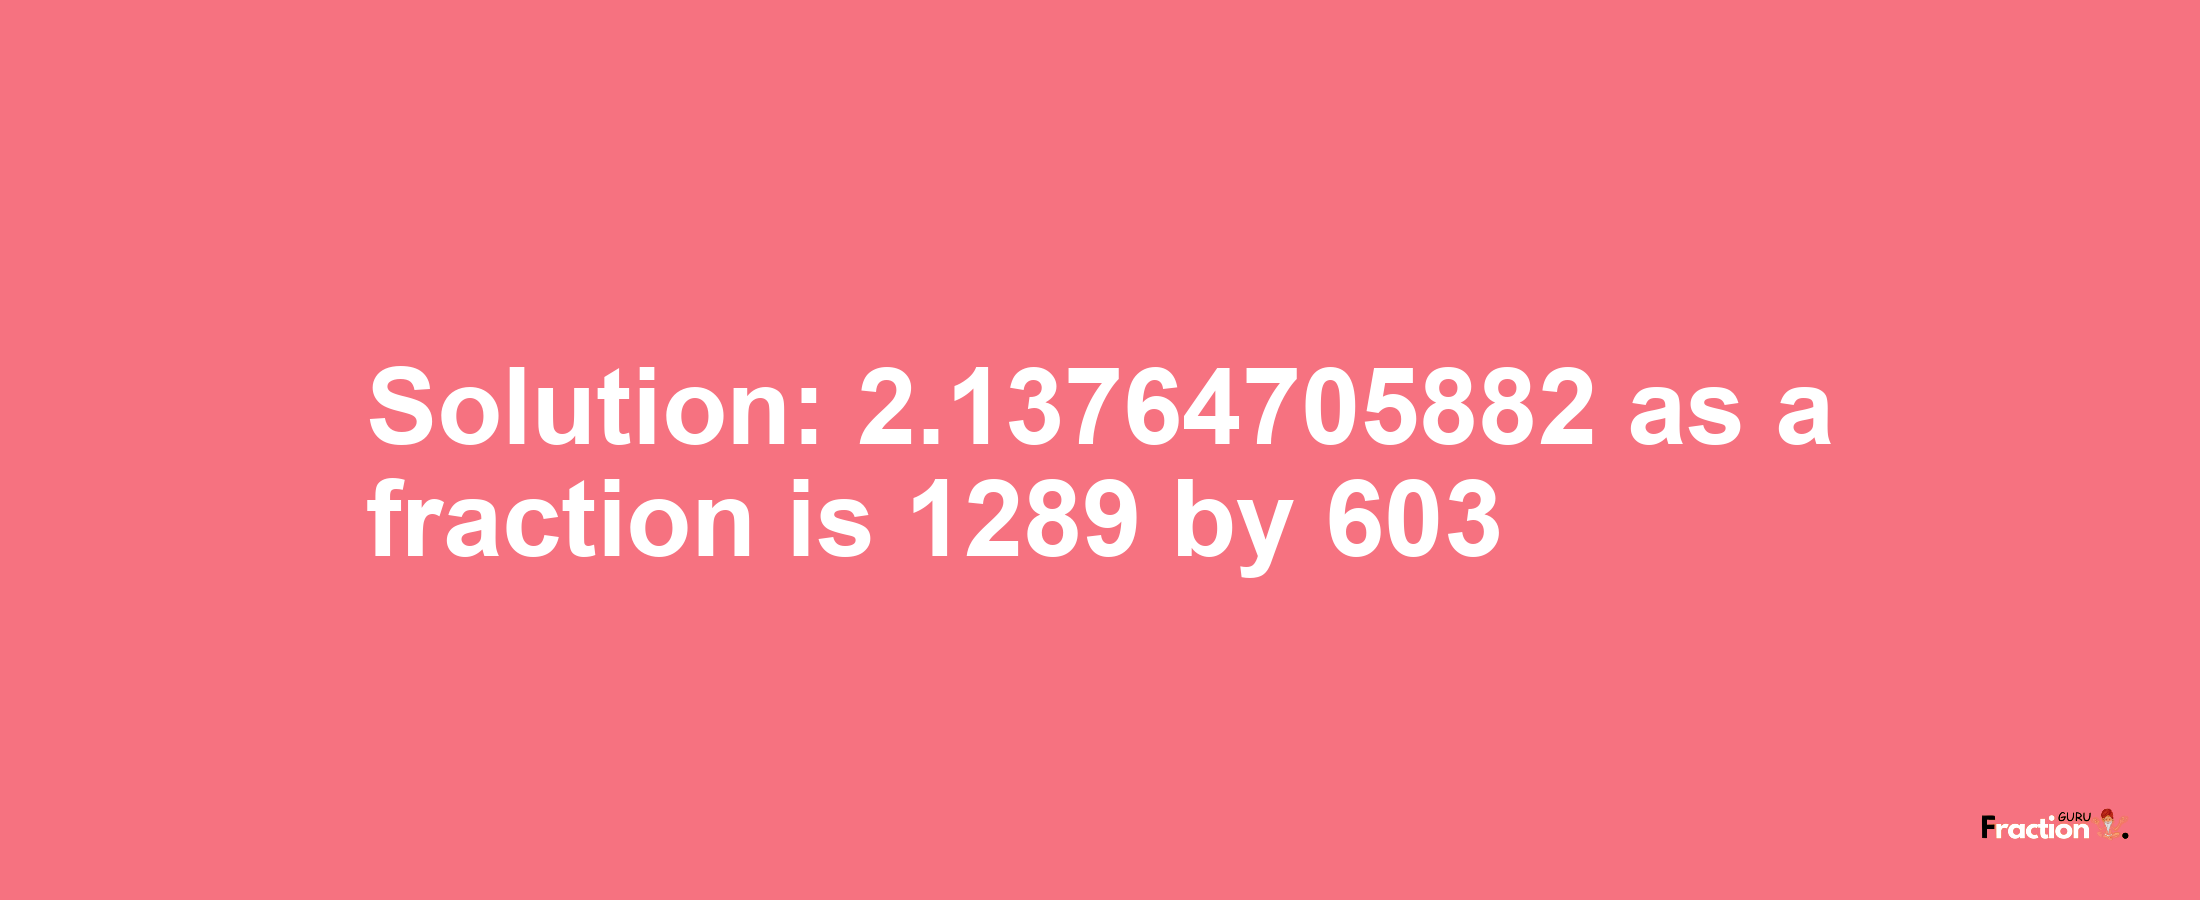 Solution:2.13764705882 as a fraction is 1289/603